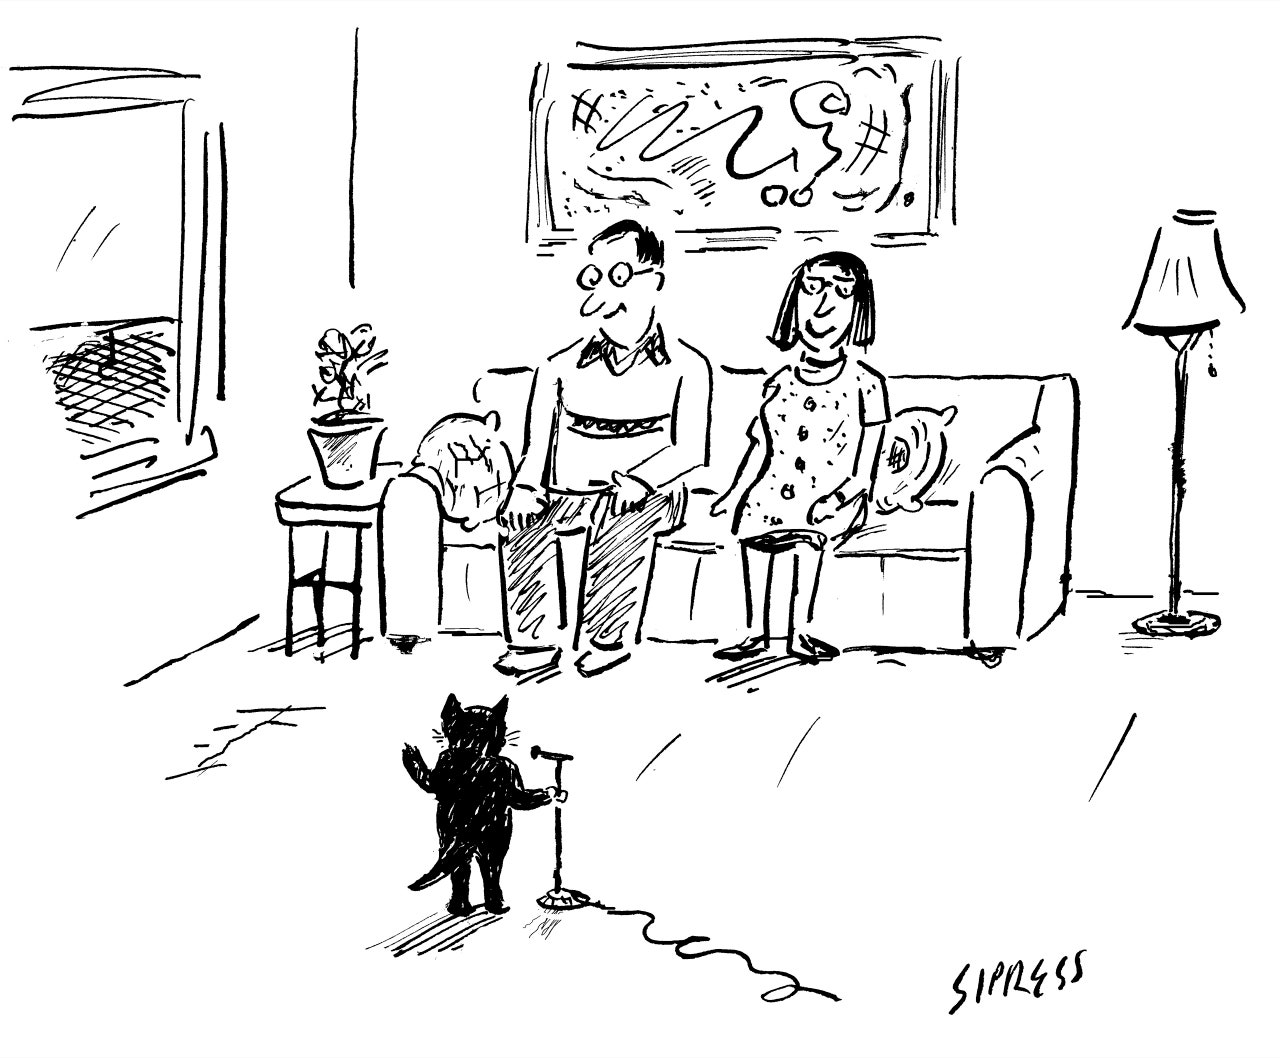 A Cartoon from The New Yorker